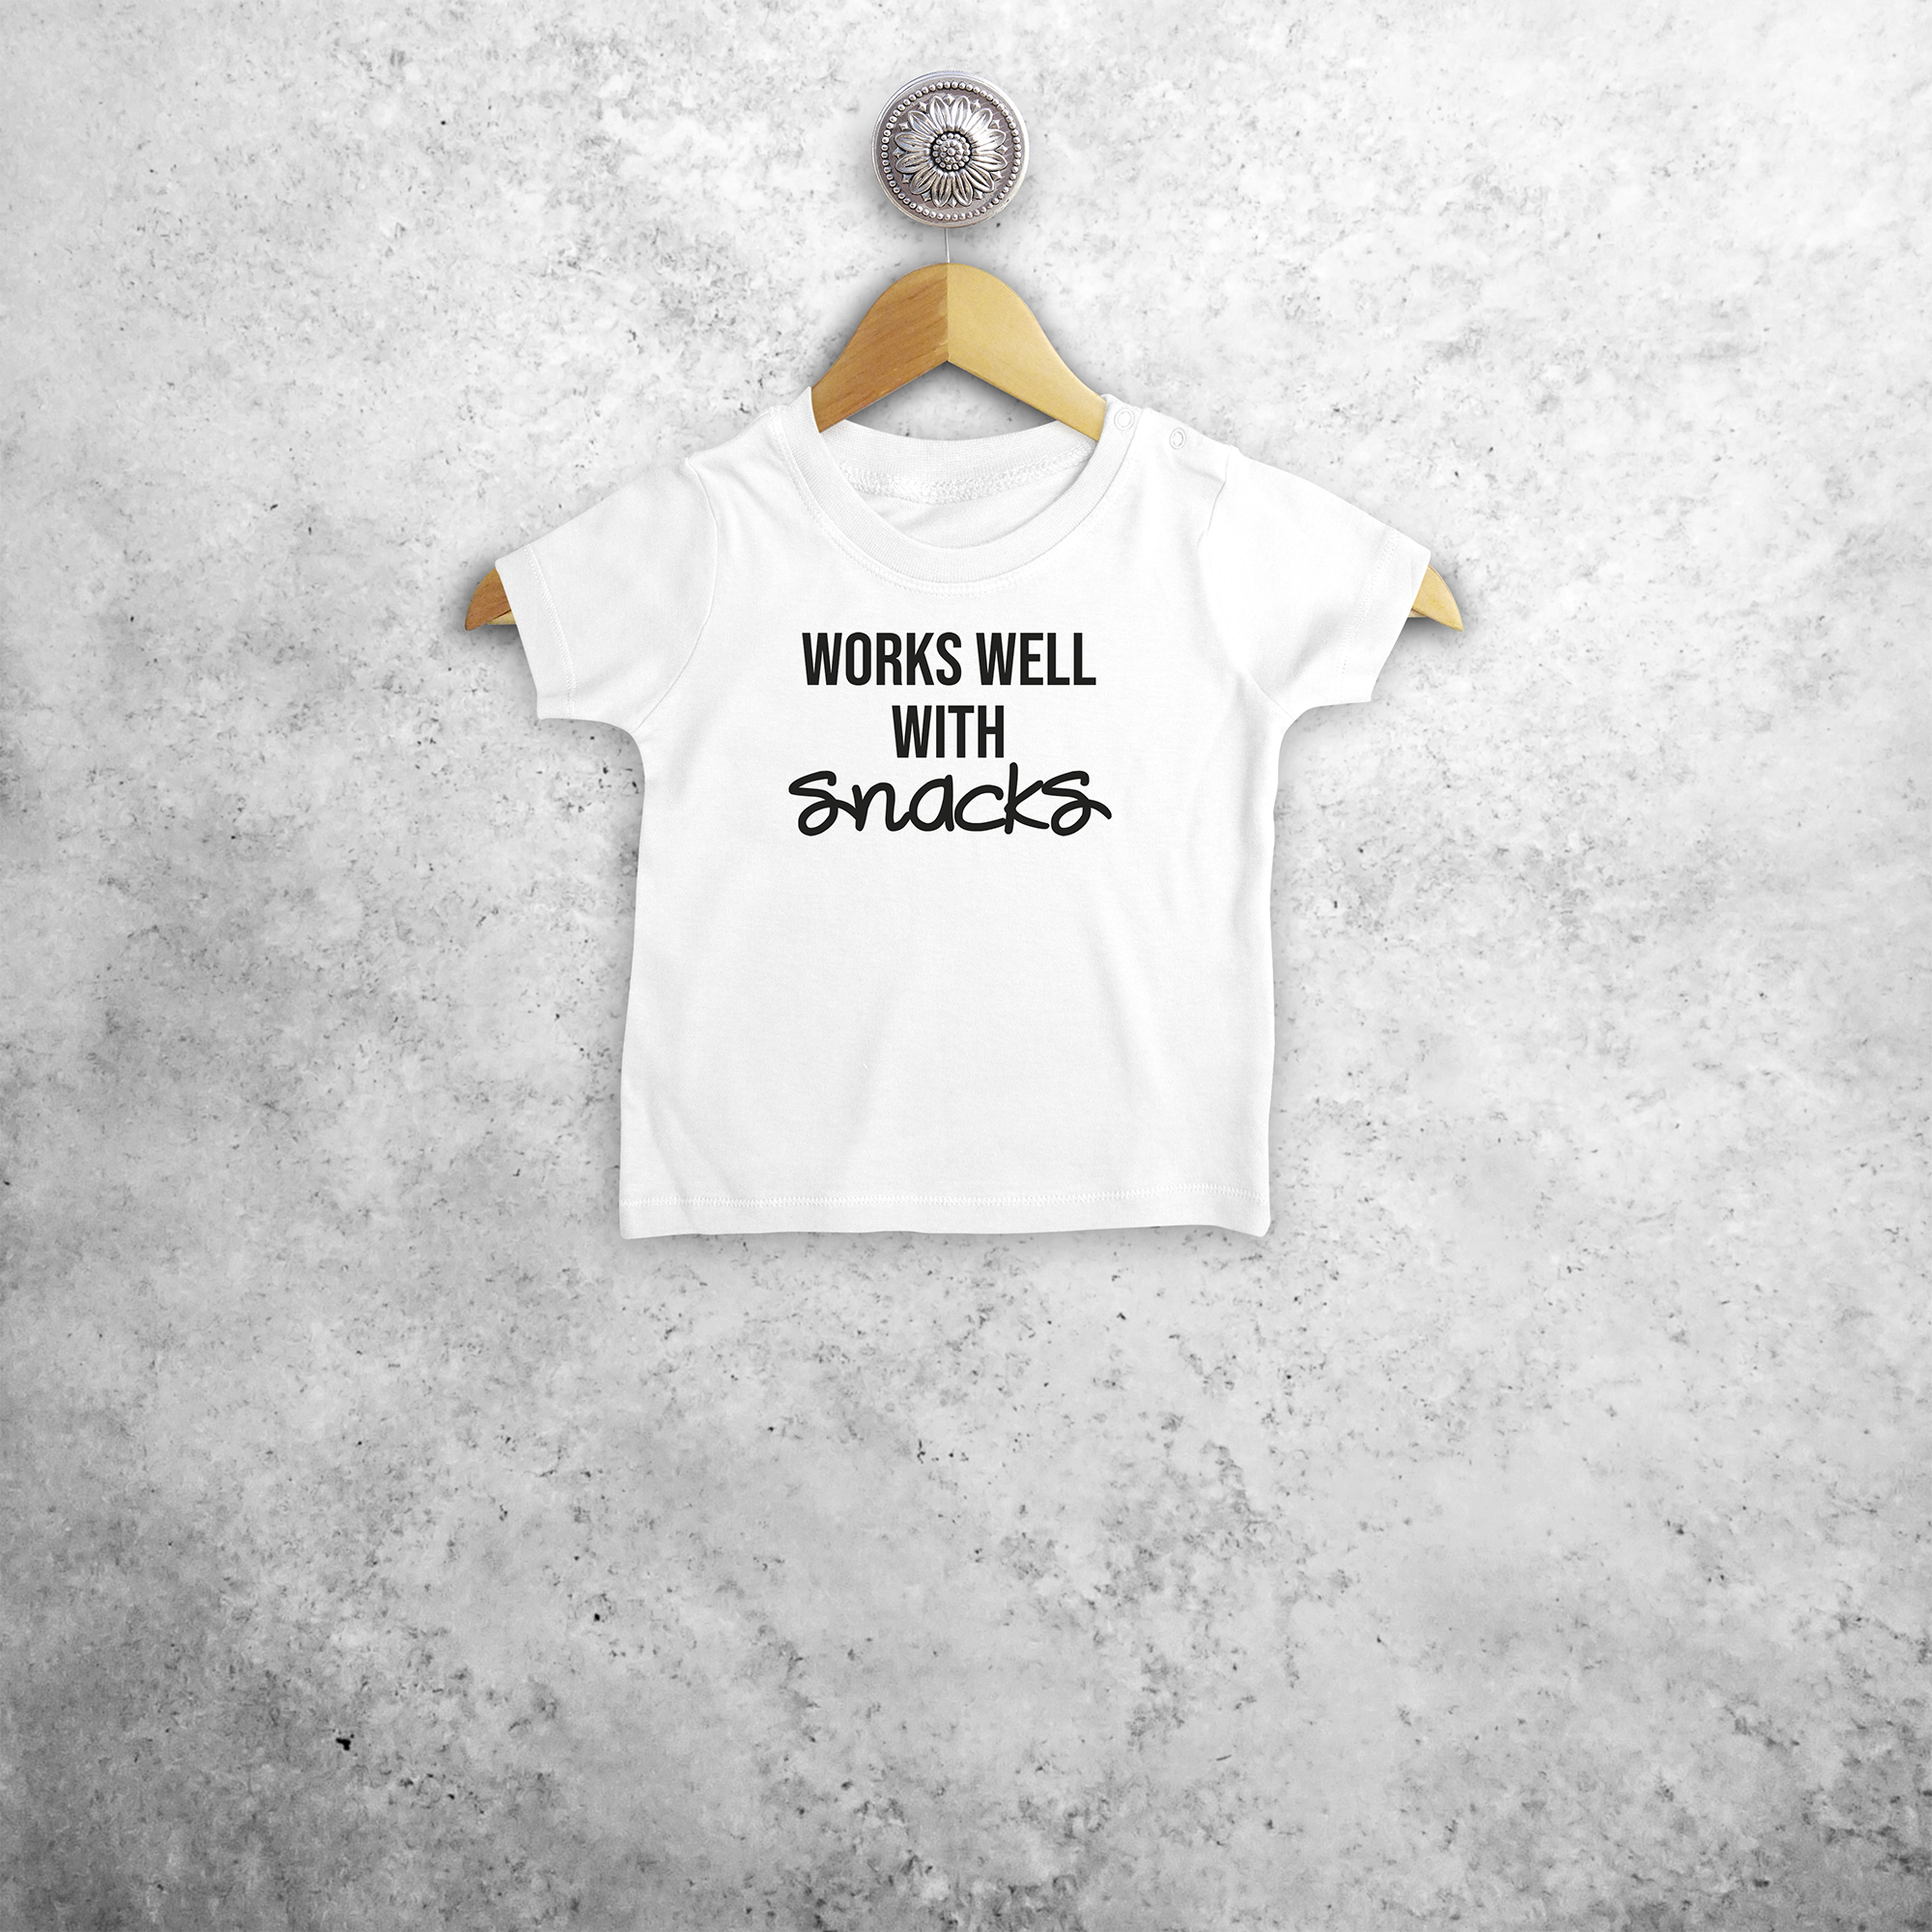 'Works well with snacks' baby shortsleeve shirt